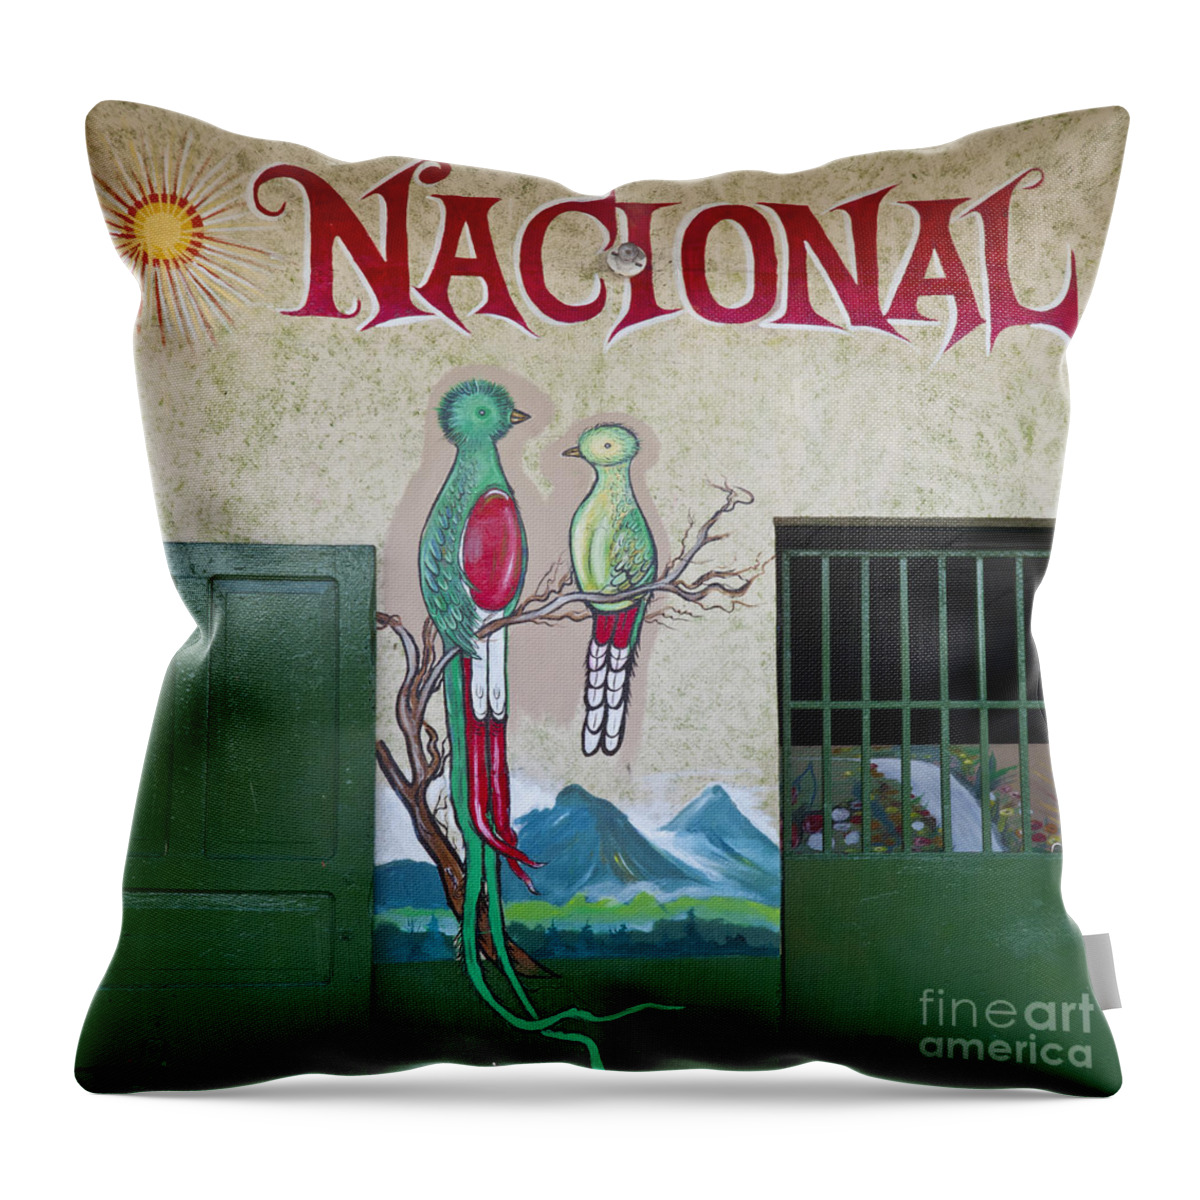 Mural Throw Pillow featuring the photograph Quetzal Painting by Heiko Koehrer-Wagner